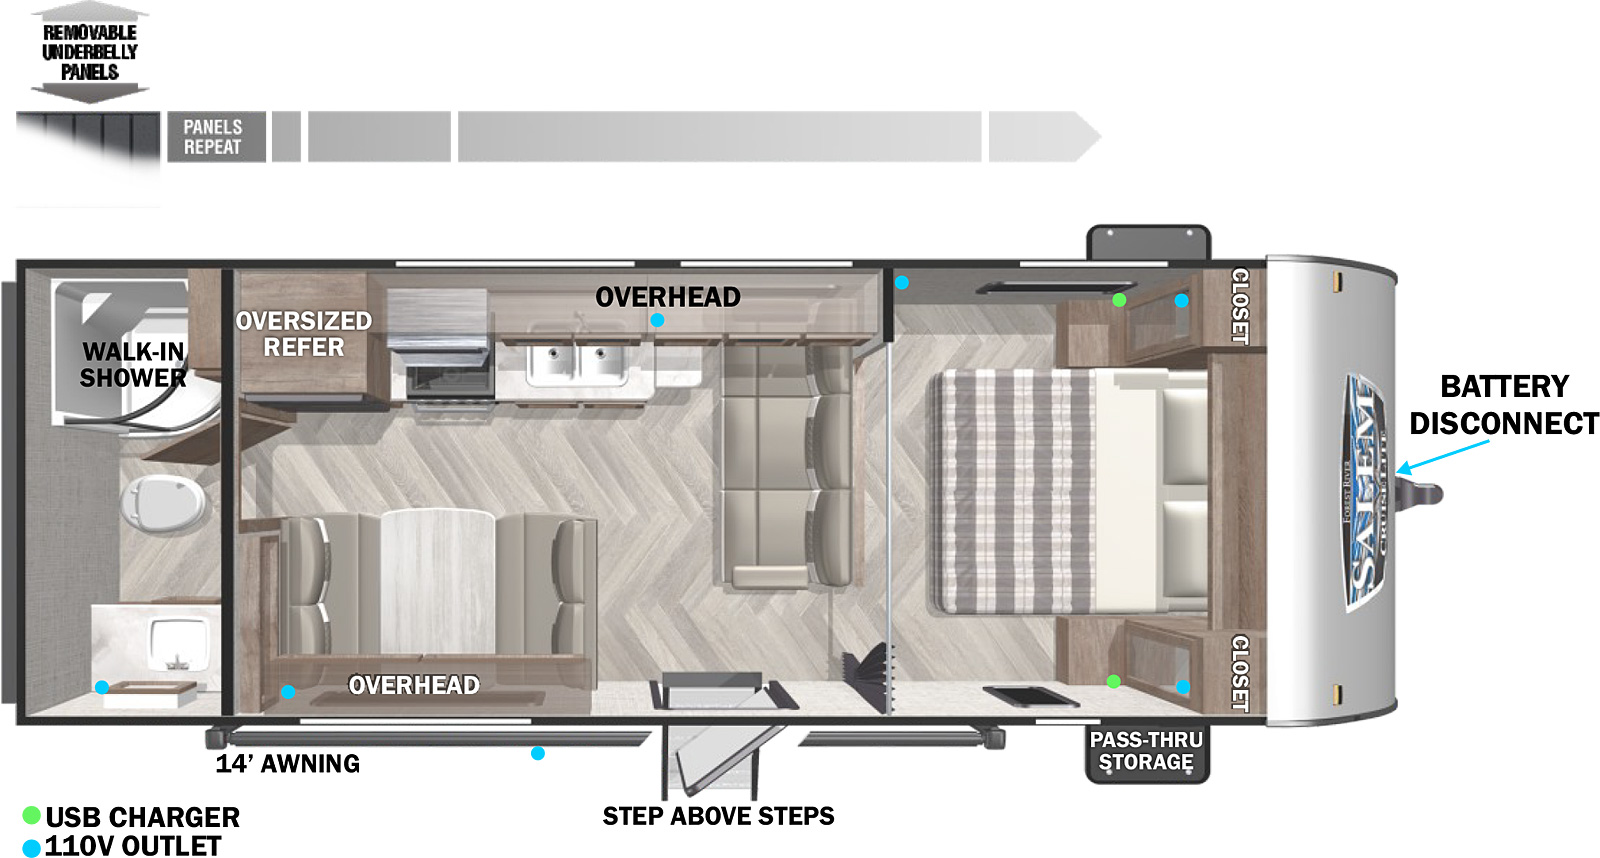 The 241QBXL is a no slide floorplan. The outside features a 14 foot electric power awning. The front of the unit features a bedroom with curtain divider. Next to the bed on both sides are closets that have CPAP storage. In the middle of the unit, there is a sofa directly in front of the entry and next to the kitchen. The dinette is on the camp side of the floorplan and it features storage below, overhead storage, and a camp side window. On the opposite side of the dinette is the kitchen. The kitchen features a refrigerator, over, sink, and overhead storage. In the back of the floorplan is the bathroom with a walk-in shower, toilet, and sink with linen storage below.